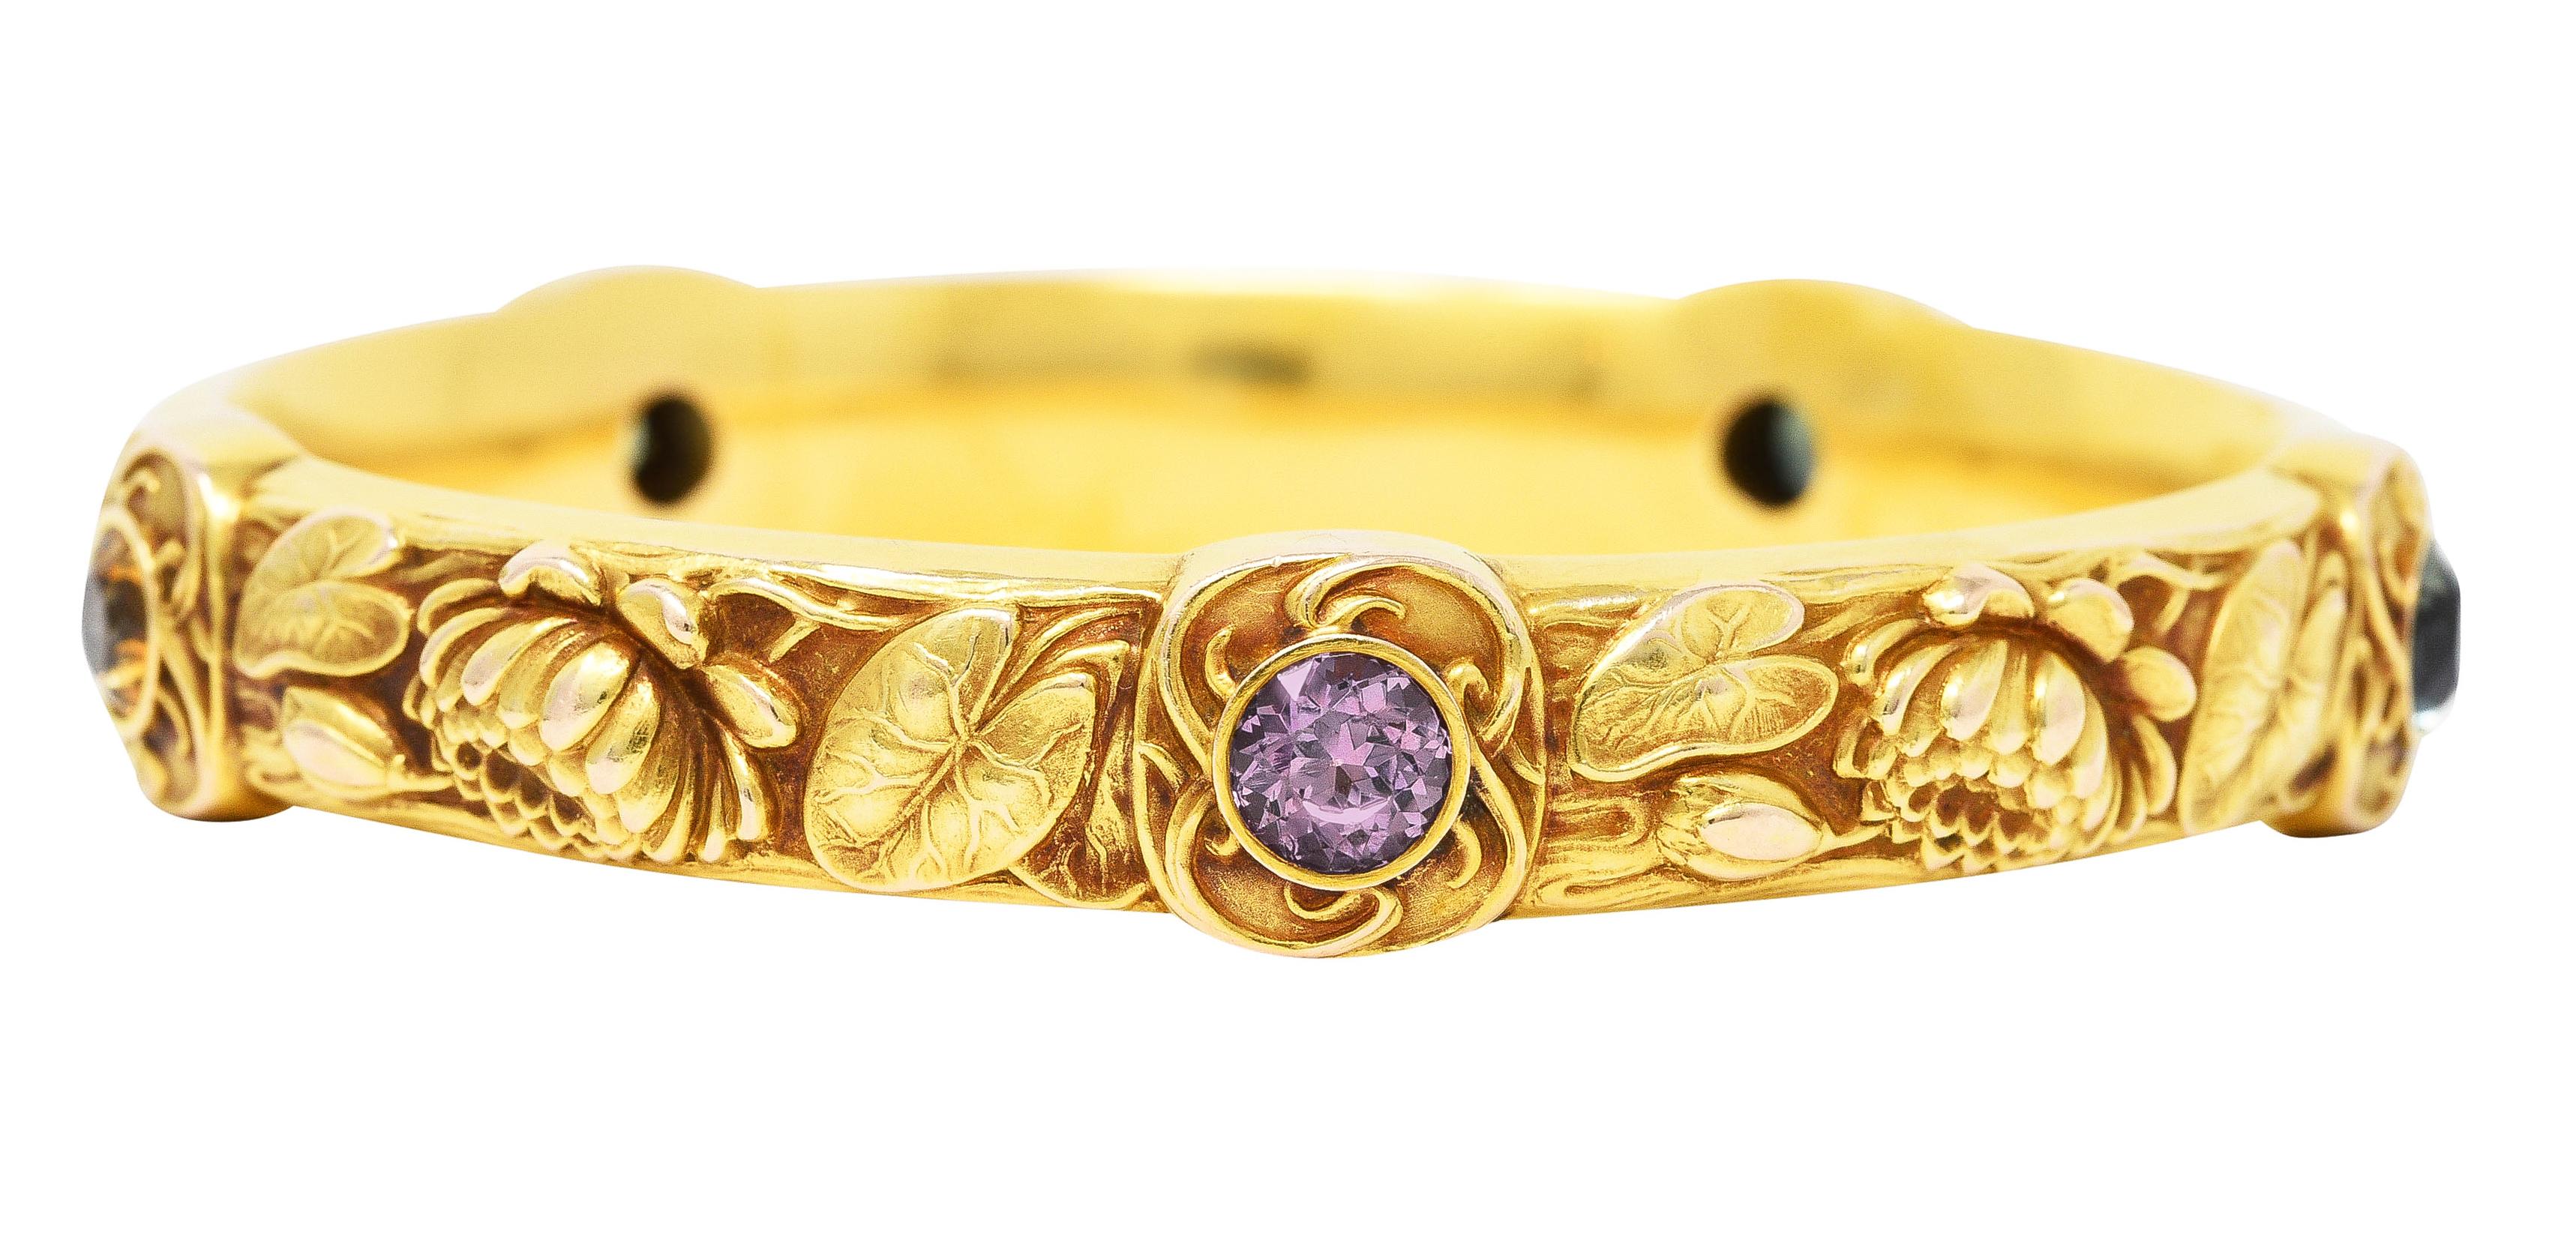 Designed as a gold bangle with repoussé lily pads and lotus flowers winding throughout. Featuring five cushion shaped stations each centering bezel set round cut Montana sapphires approximately 5.50 carats total. Light lavender, light green, light